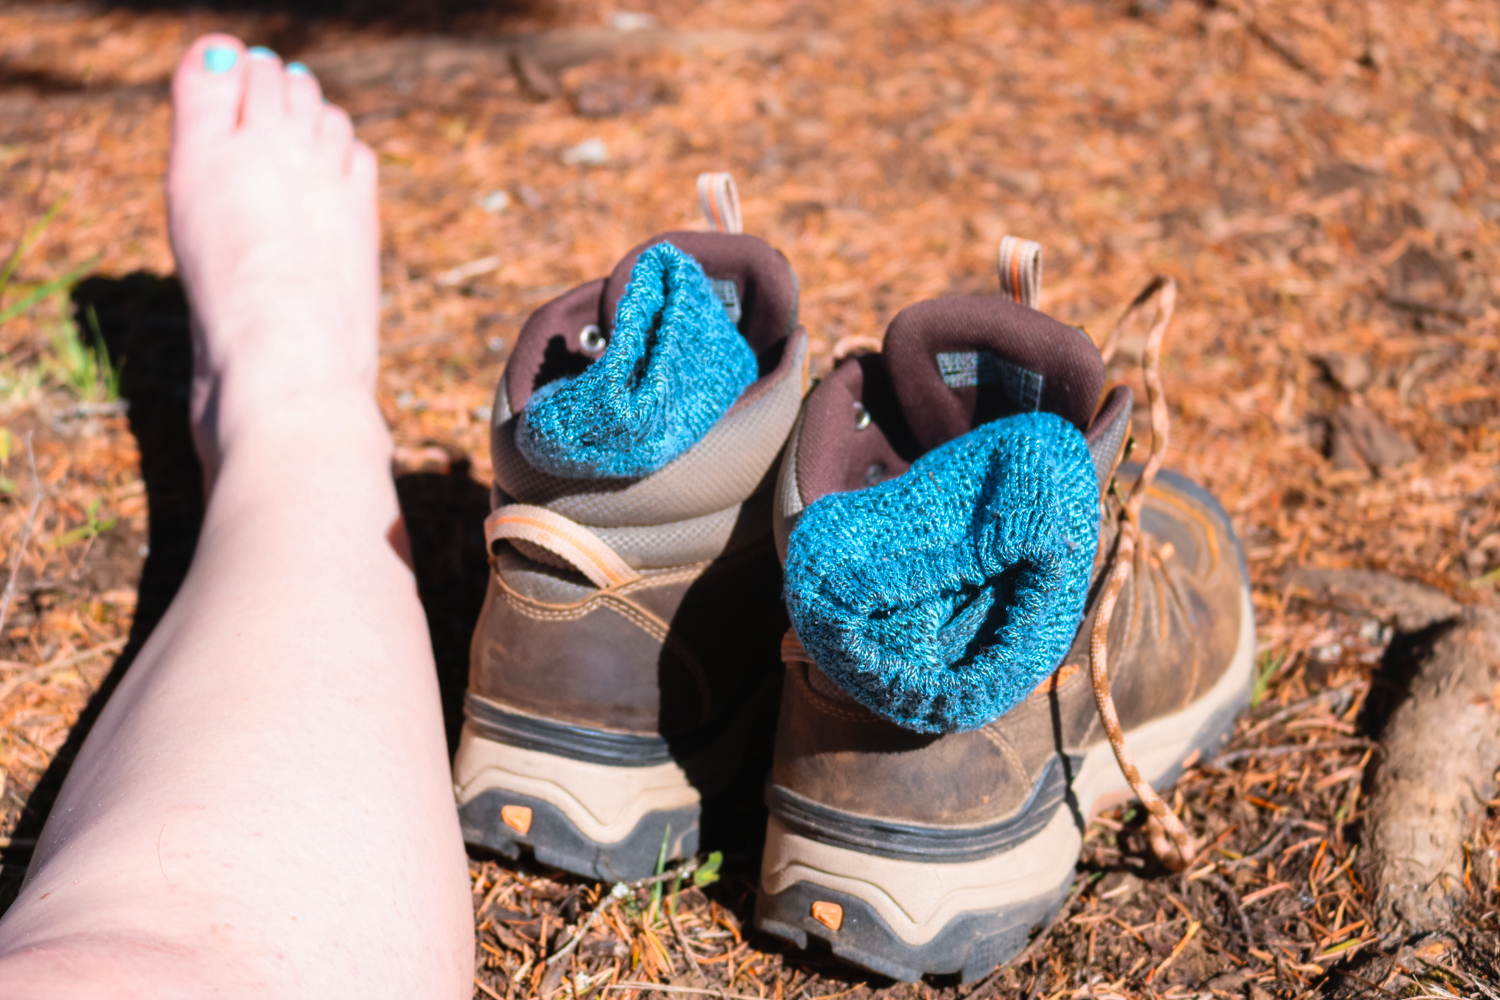 Woman lets her socks air out on a hike.